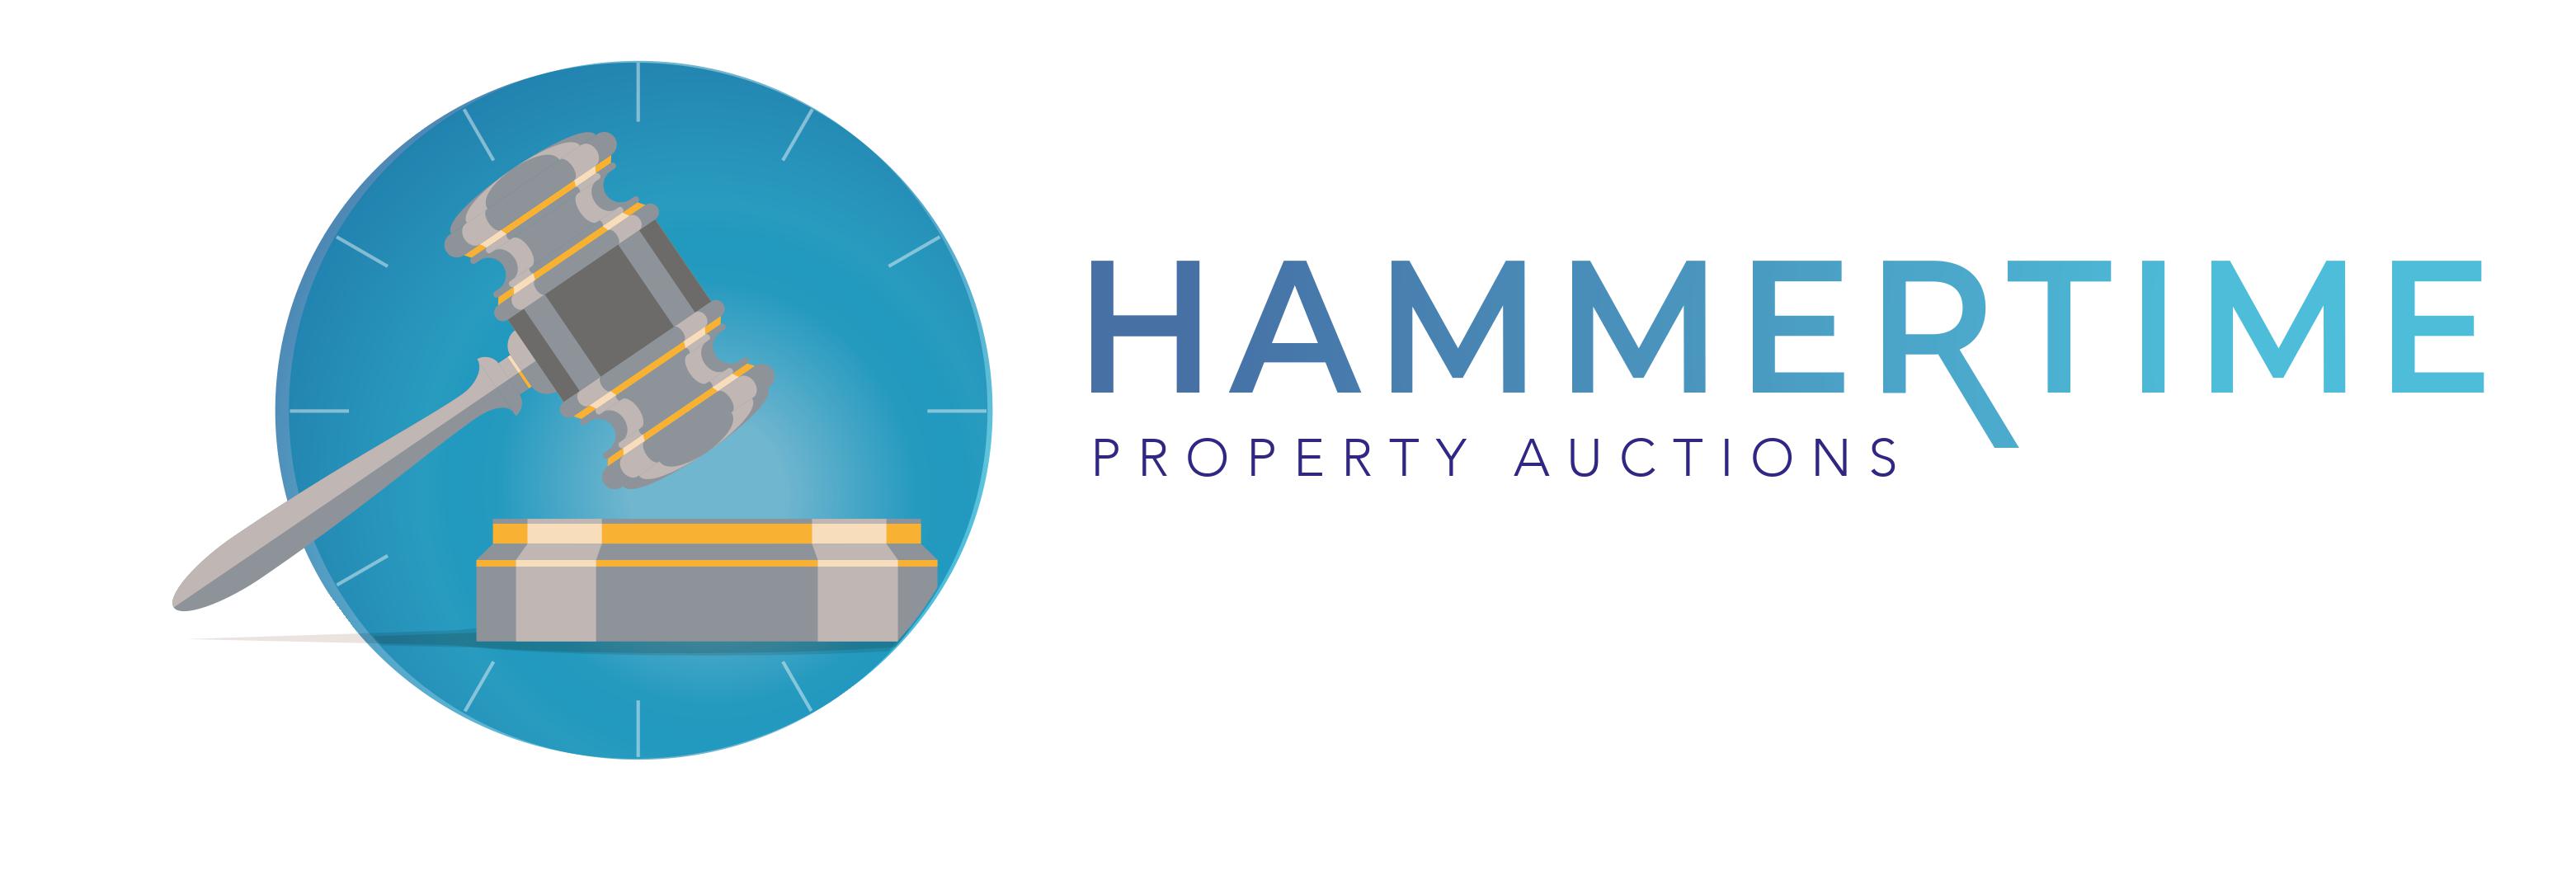 Hammertime Property Auctions